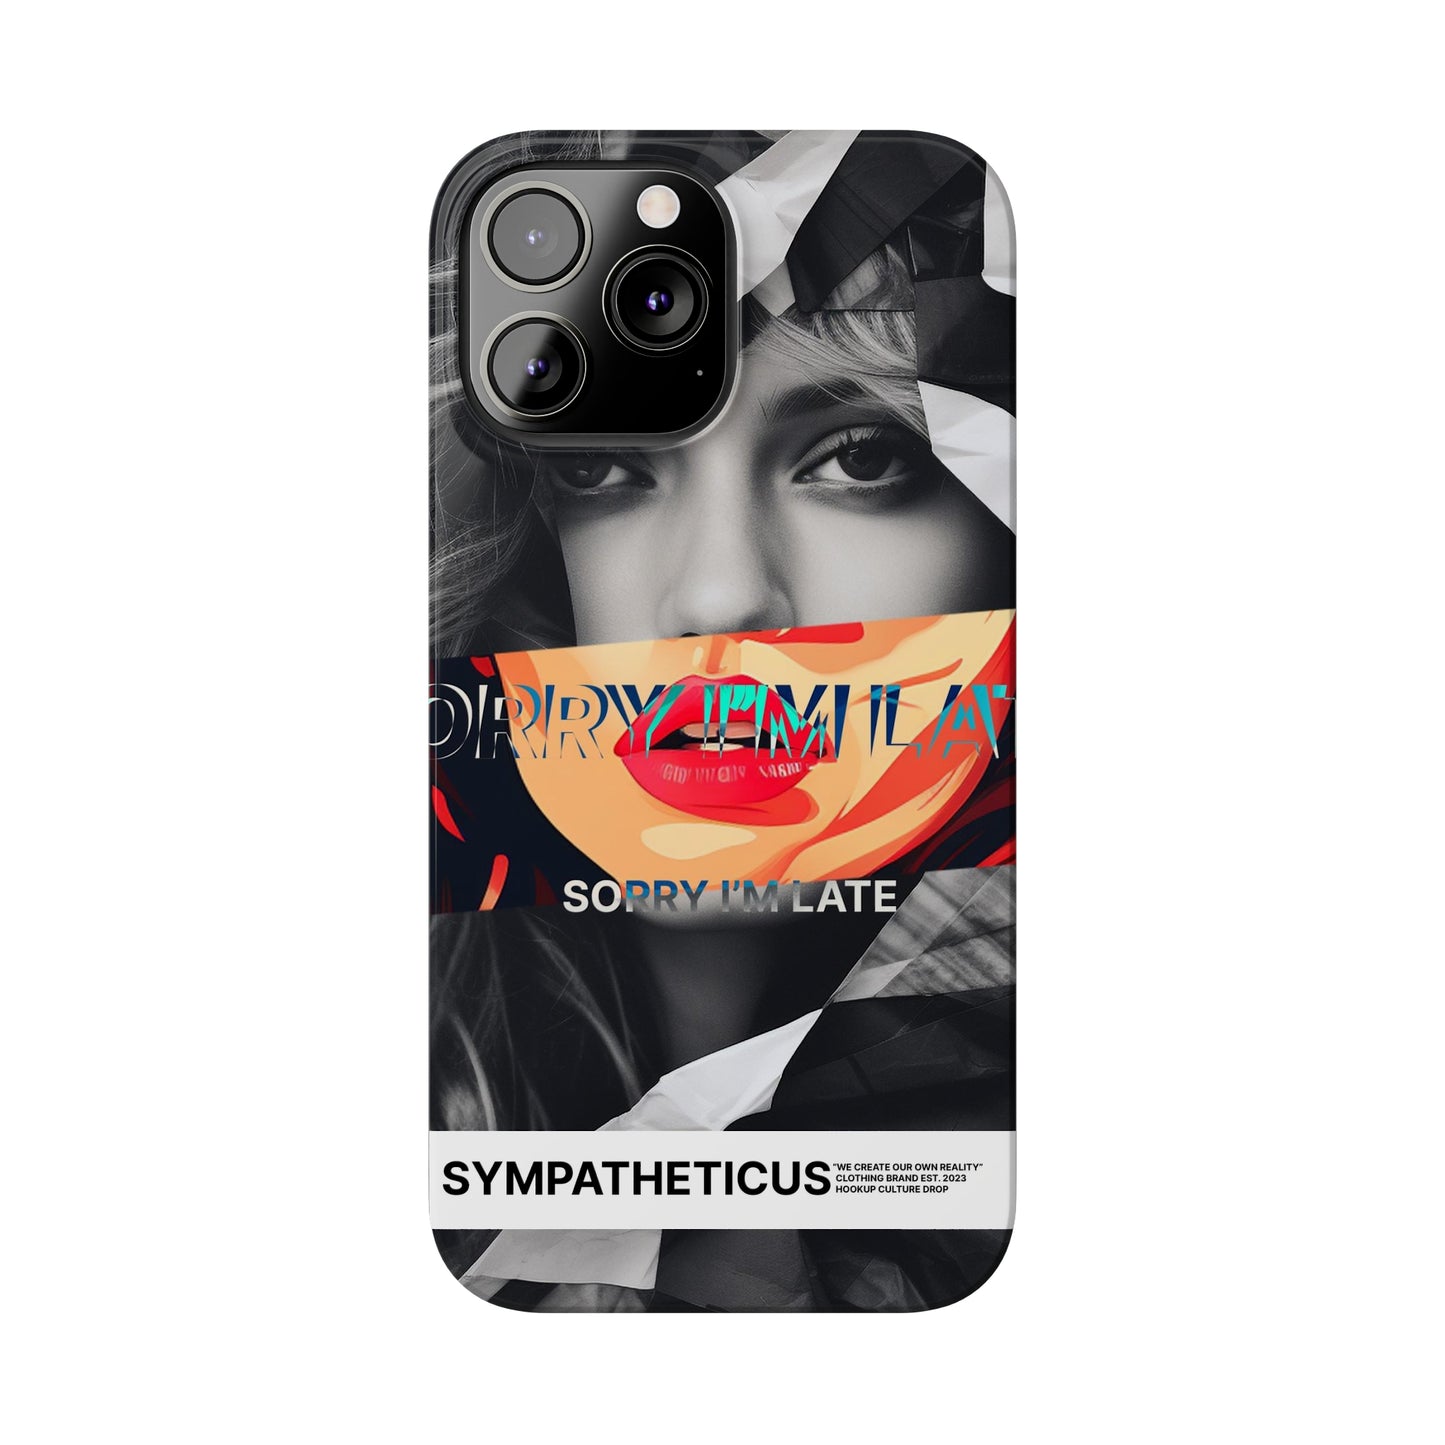 Hookup culture special iphone case-08